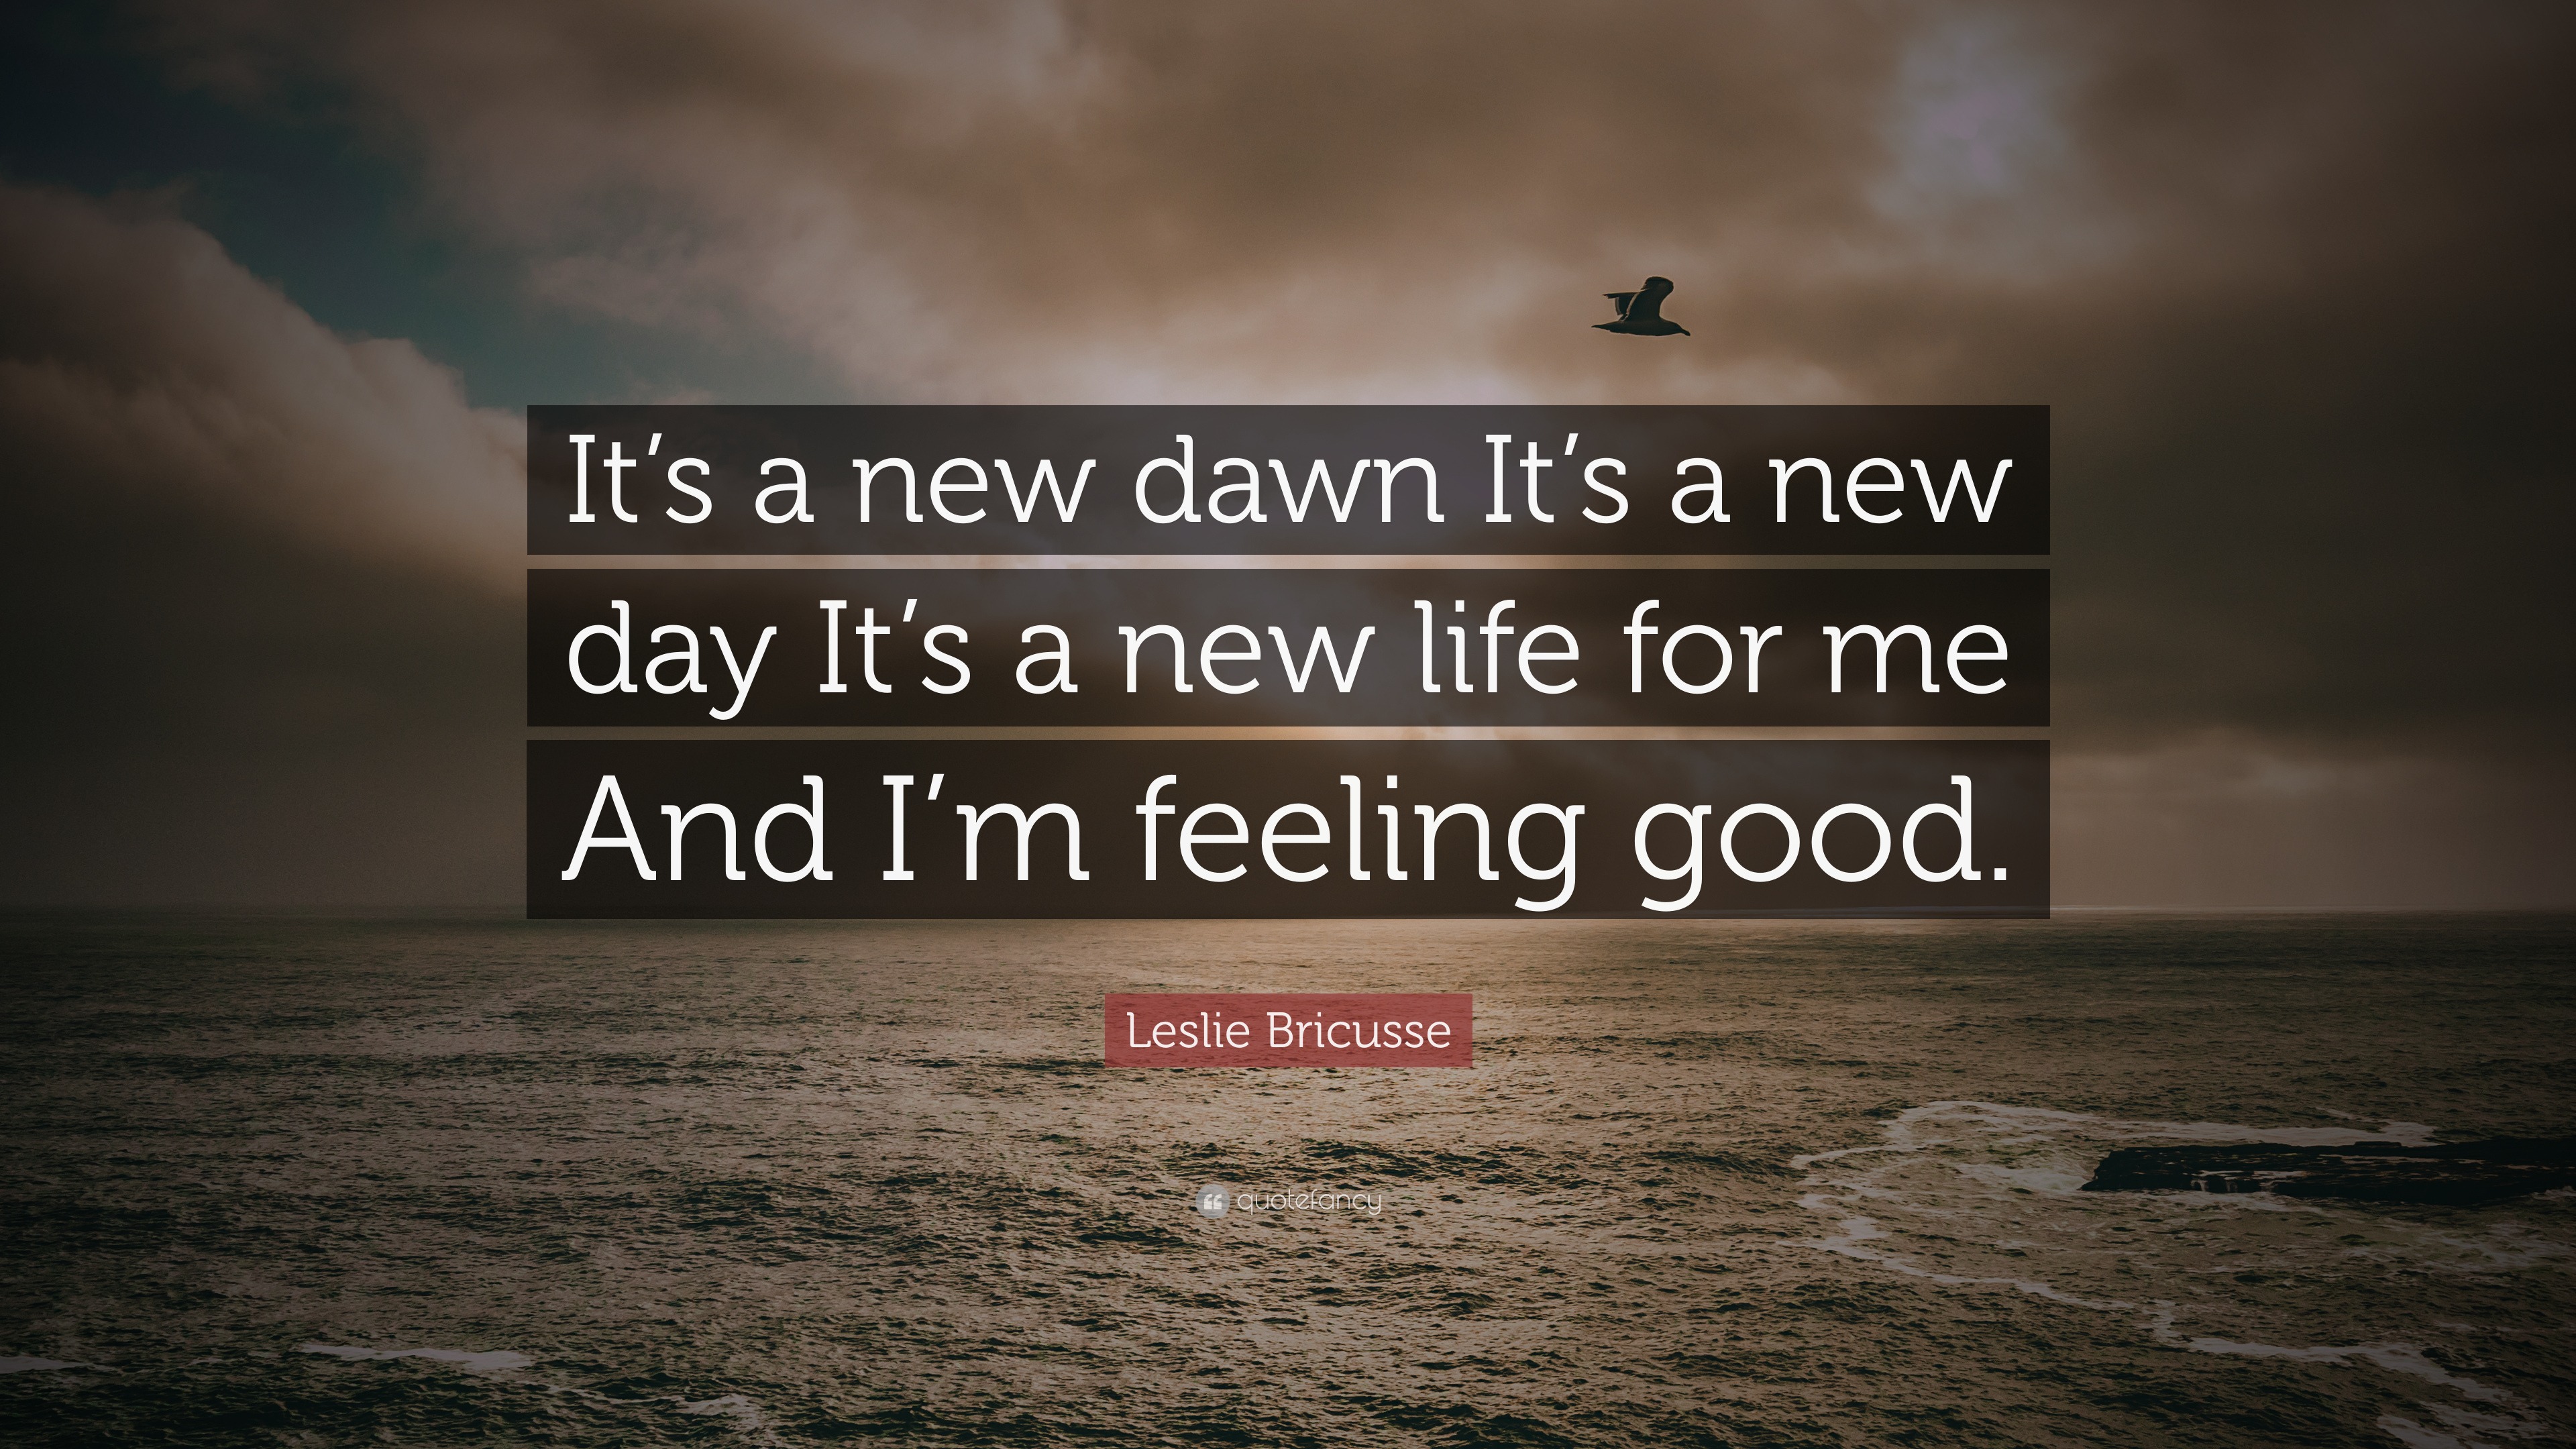 Leslie Bricusse Quote It S A New Dawn It S A New Day It S A New Life For Me And I M Feeling Good 9 Wallpapers Quotefancy